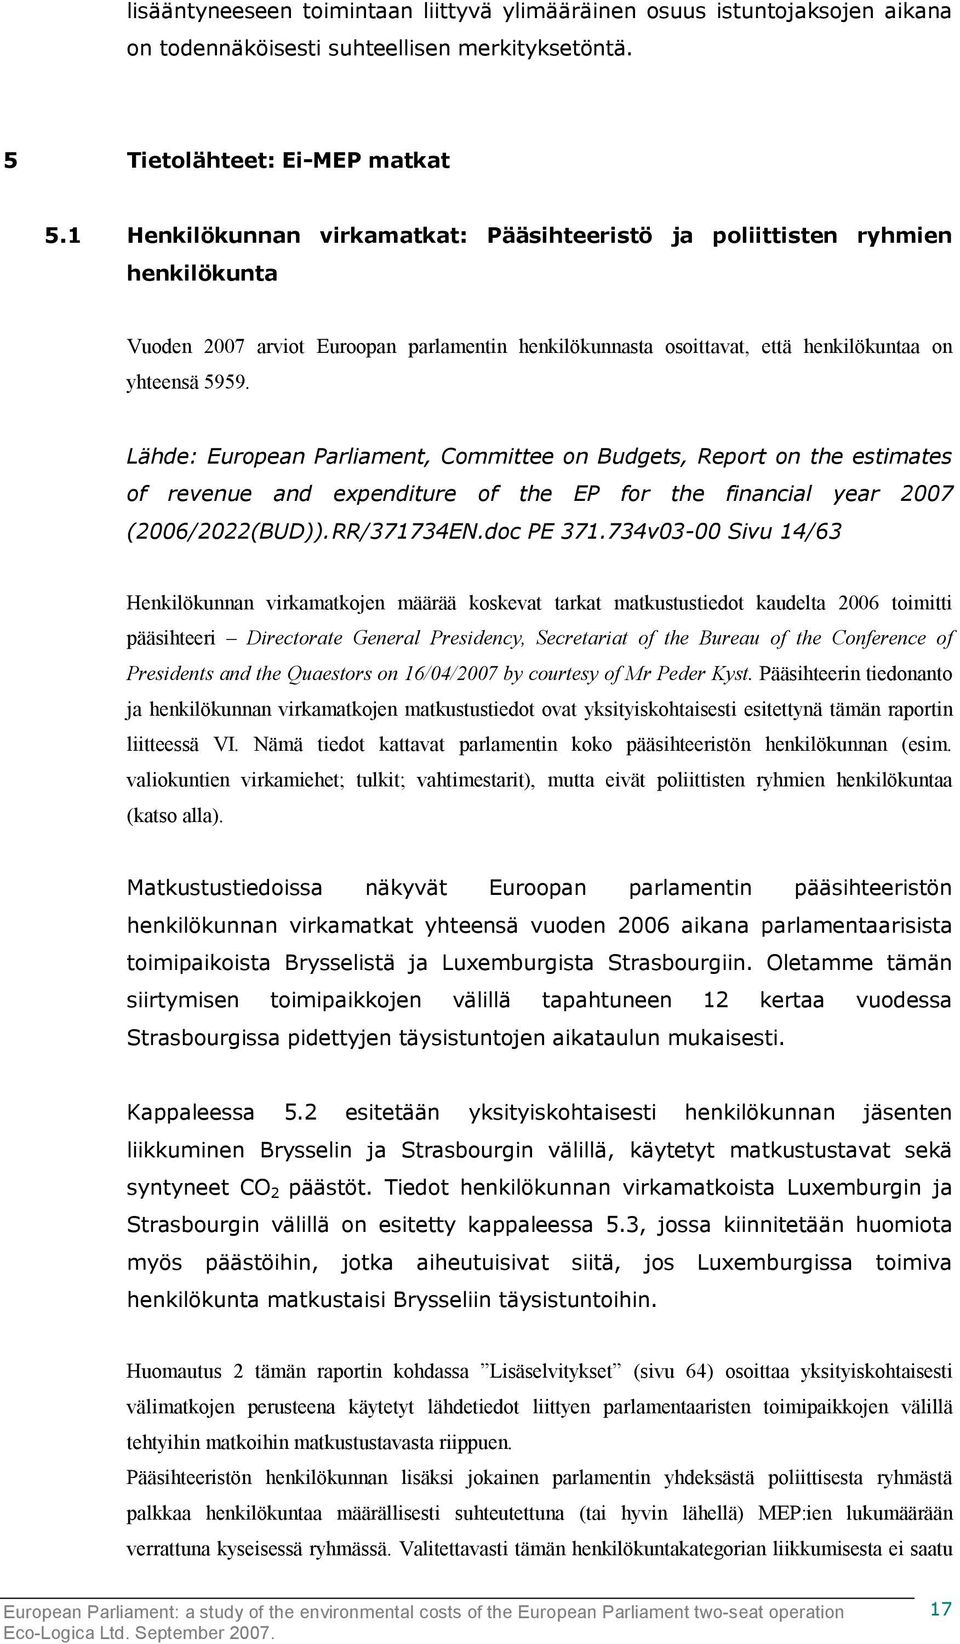 Lähde: European Parliament, Committee on Budgets, Report on the estimates of revenue and expenditure of the EP for the financial year 2007 (2006/2022(BUD)). RR/371734EN.doc PE 371.